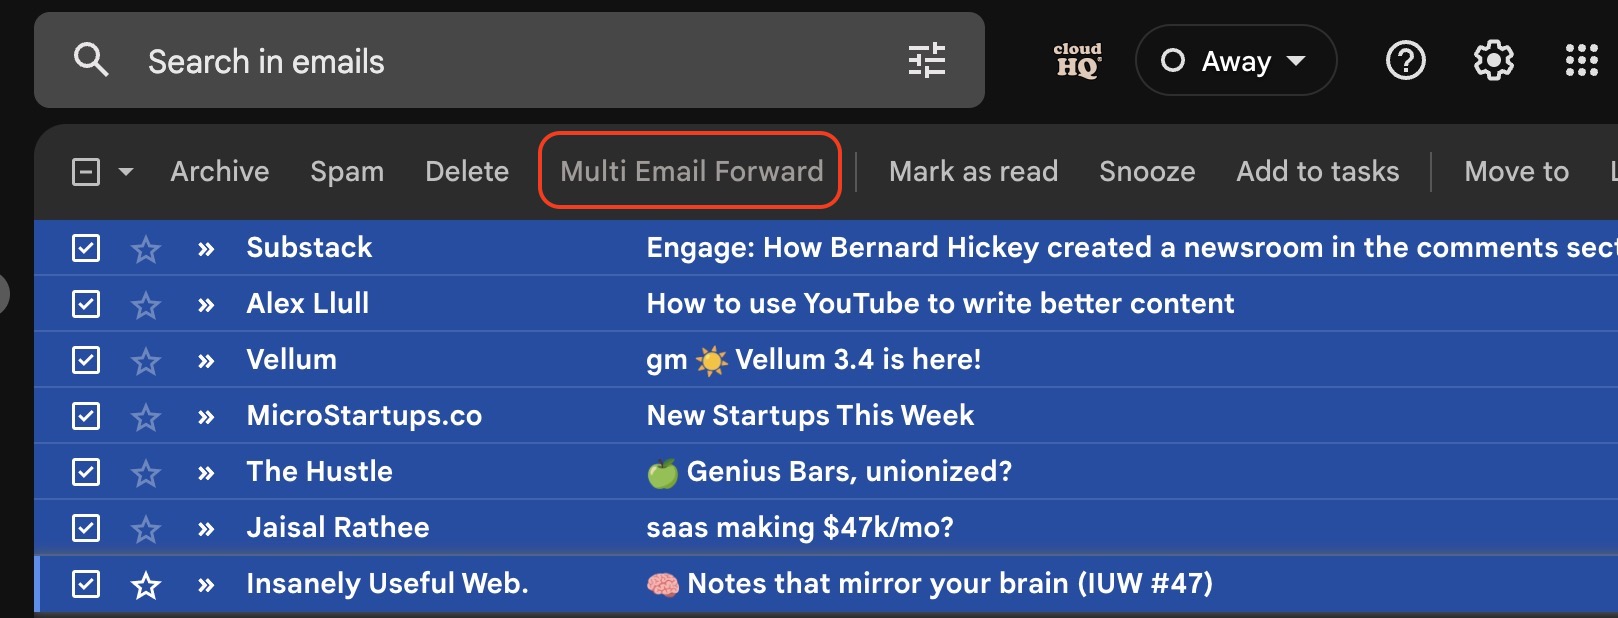 gmail multi email forward select emails